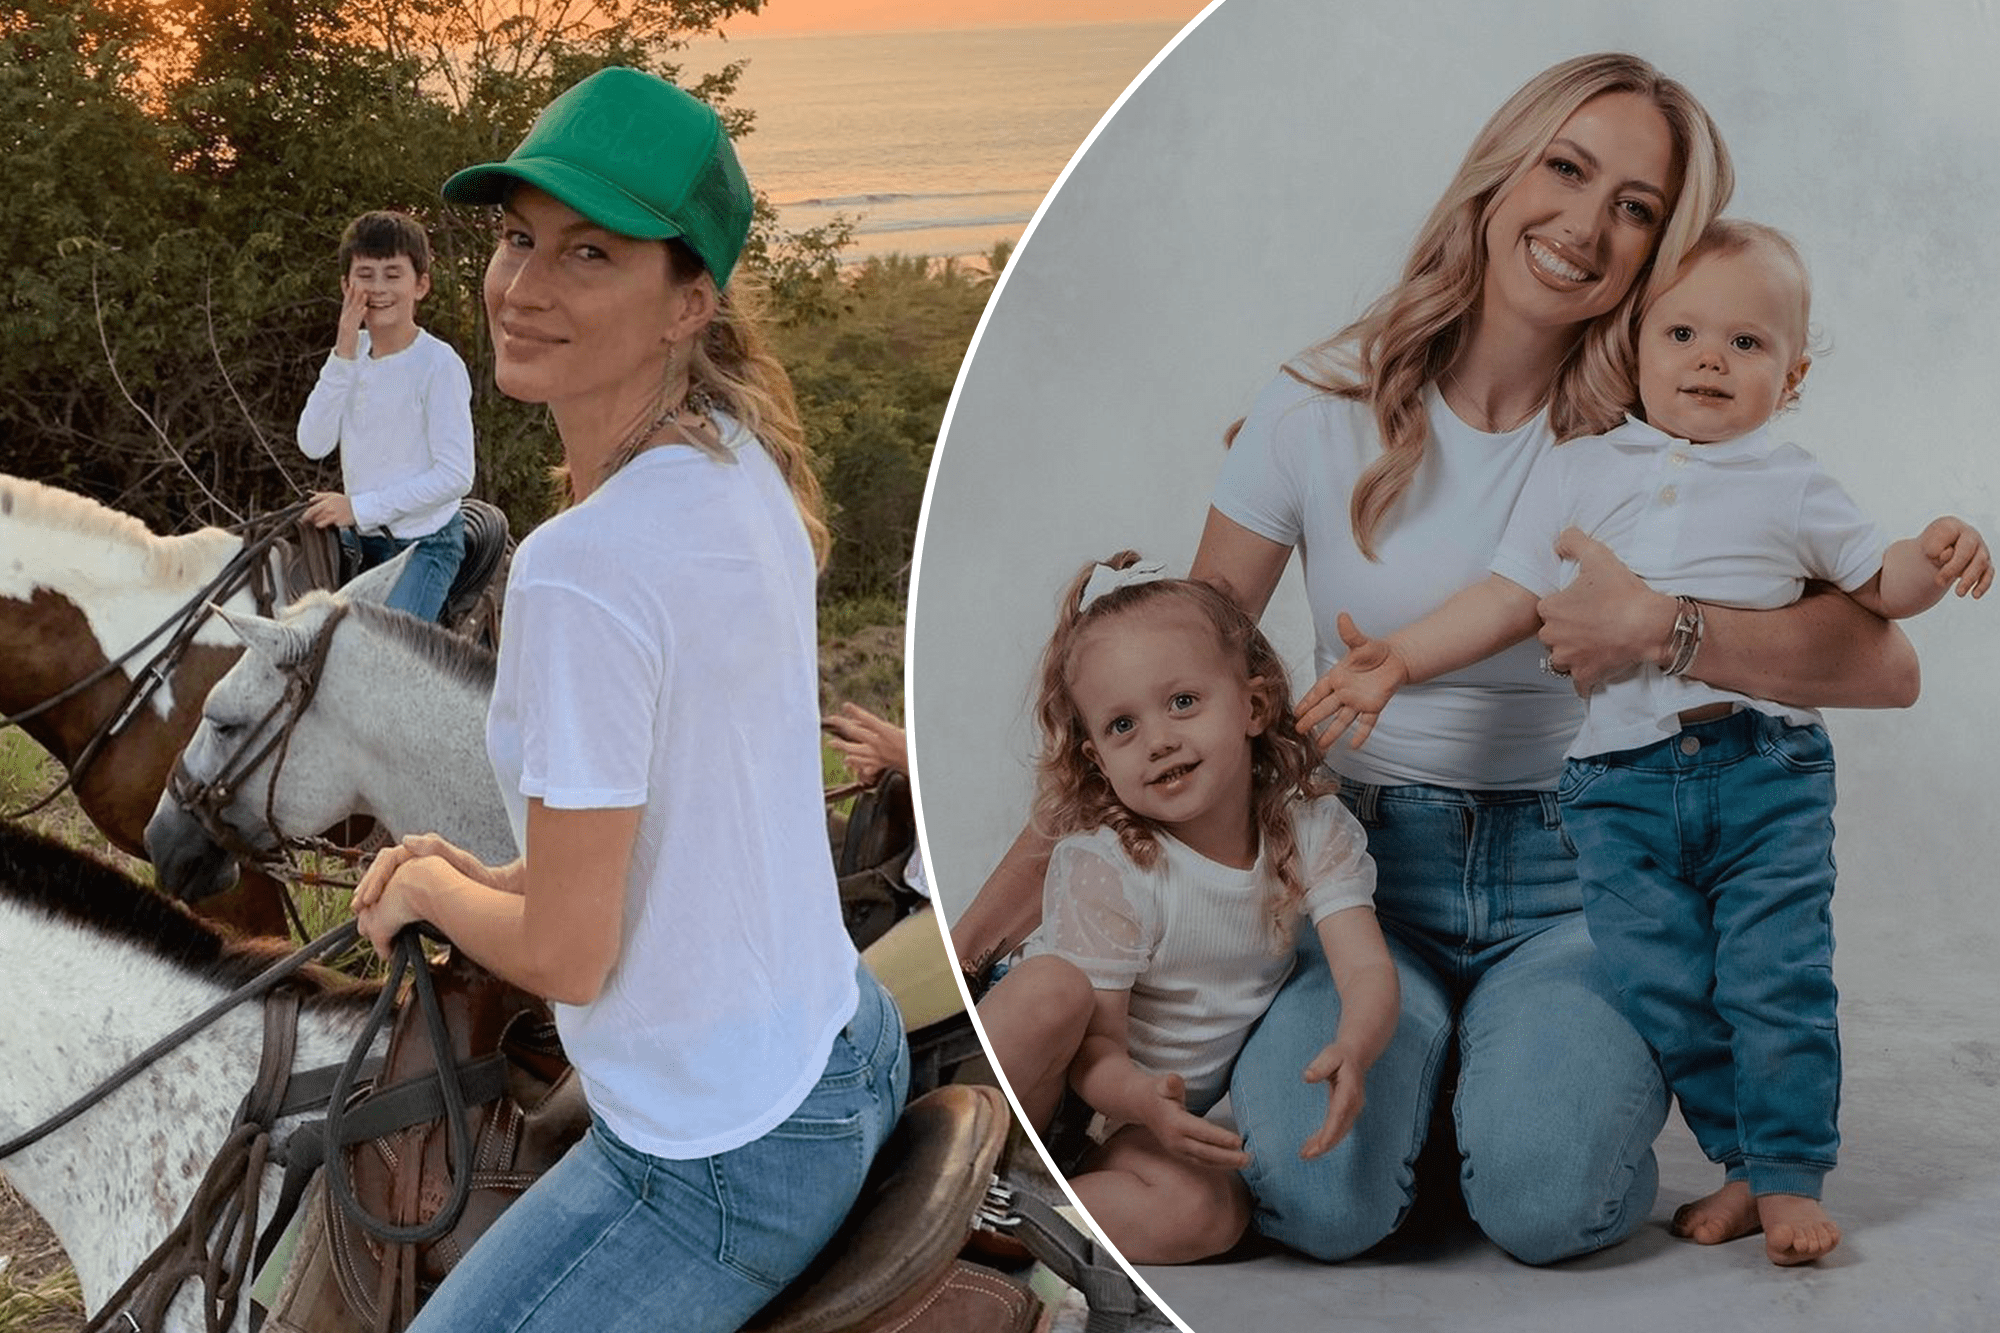 Gisele Bündchen, Halle Berry, Brittany Mahomes & more celebrate Mother’s Day